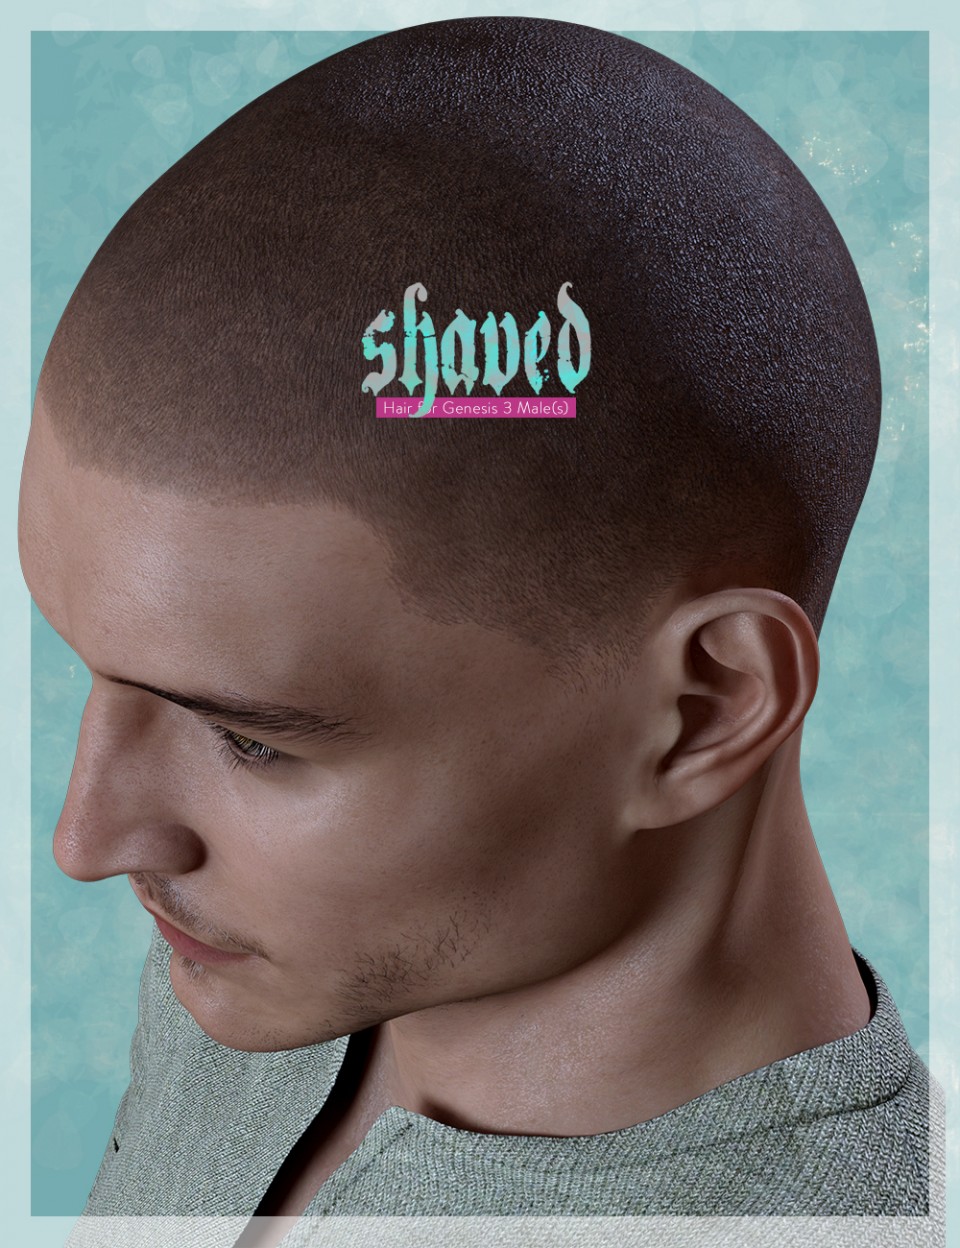 Shaved Hair for Genesis 3 Male(s)_DAZ3D下载站